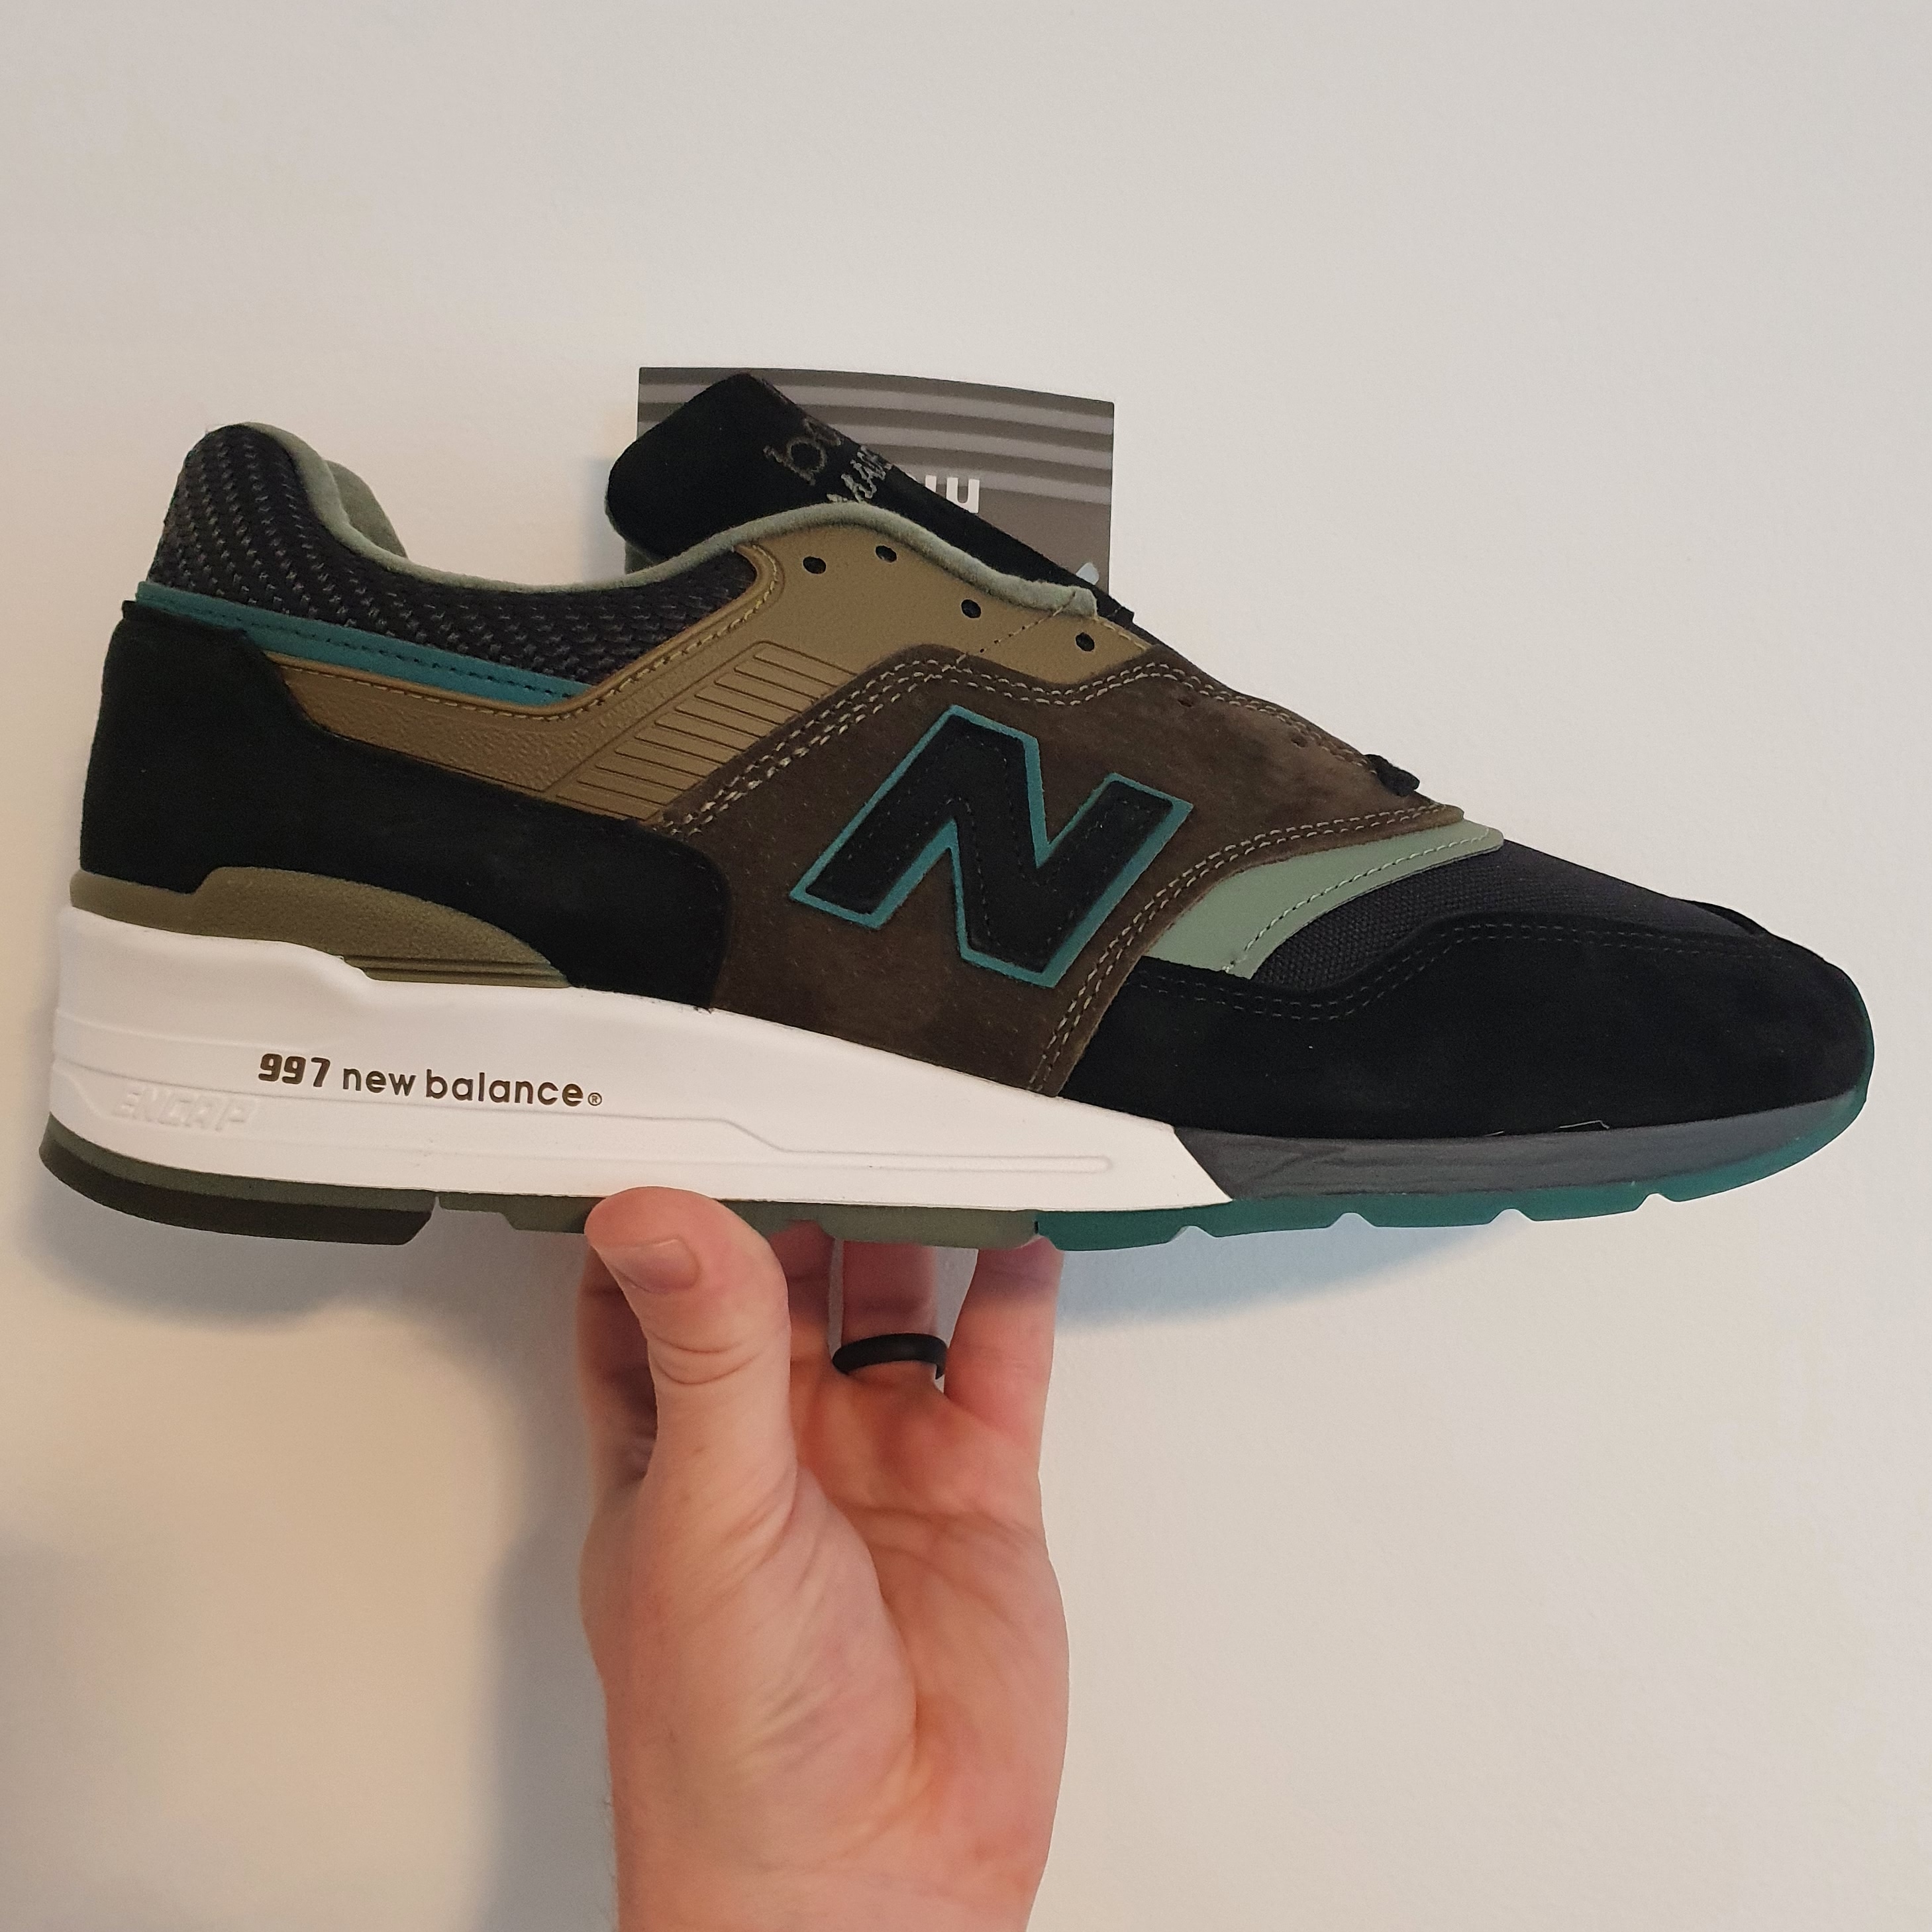 Anyone into trainers/sneakers? (Vol. 2) - Page 360 - The Lounge - PistonHeads